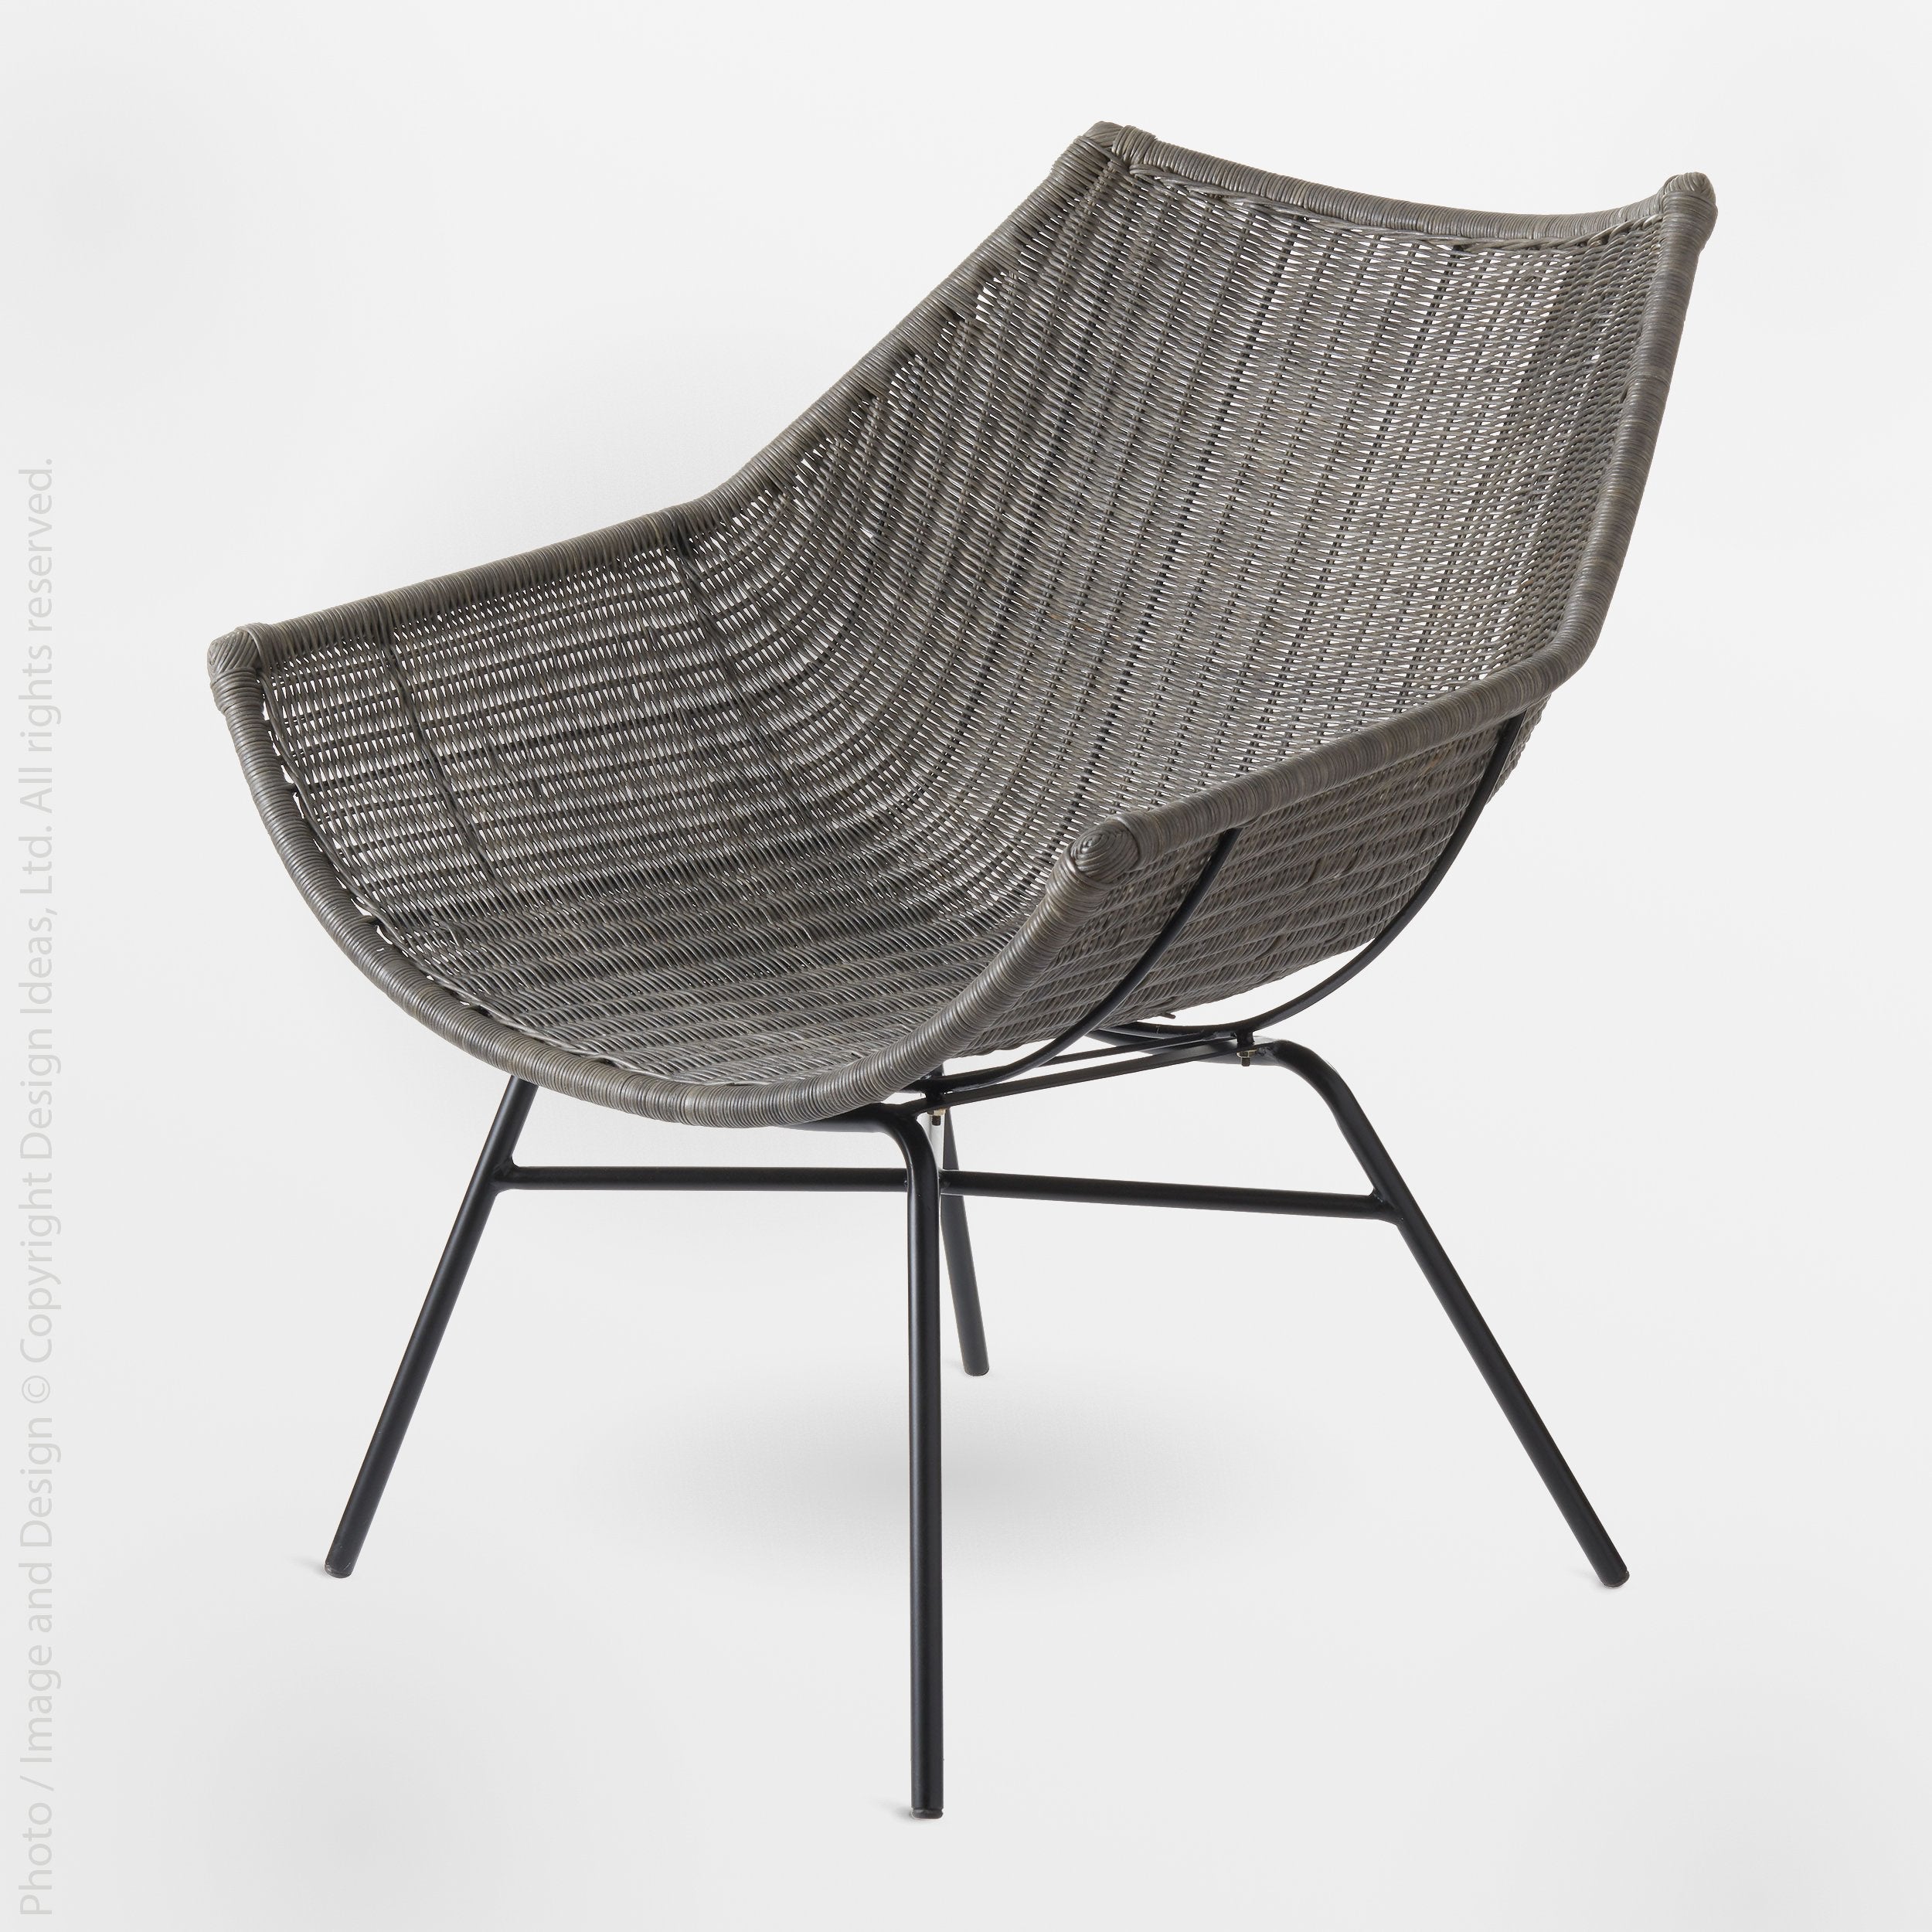 Kamala Rattan Lounge Chair - Natural Color | Image 1 | From the Kamala Collection | Exquisitely created with natural rattan for long lasting use | texxture home